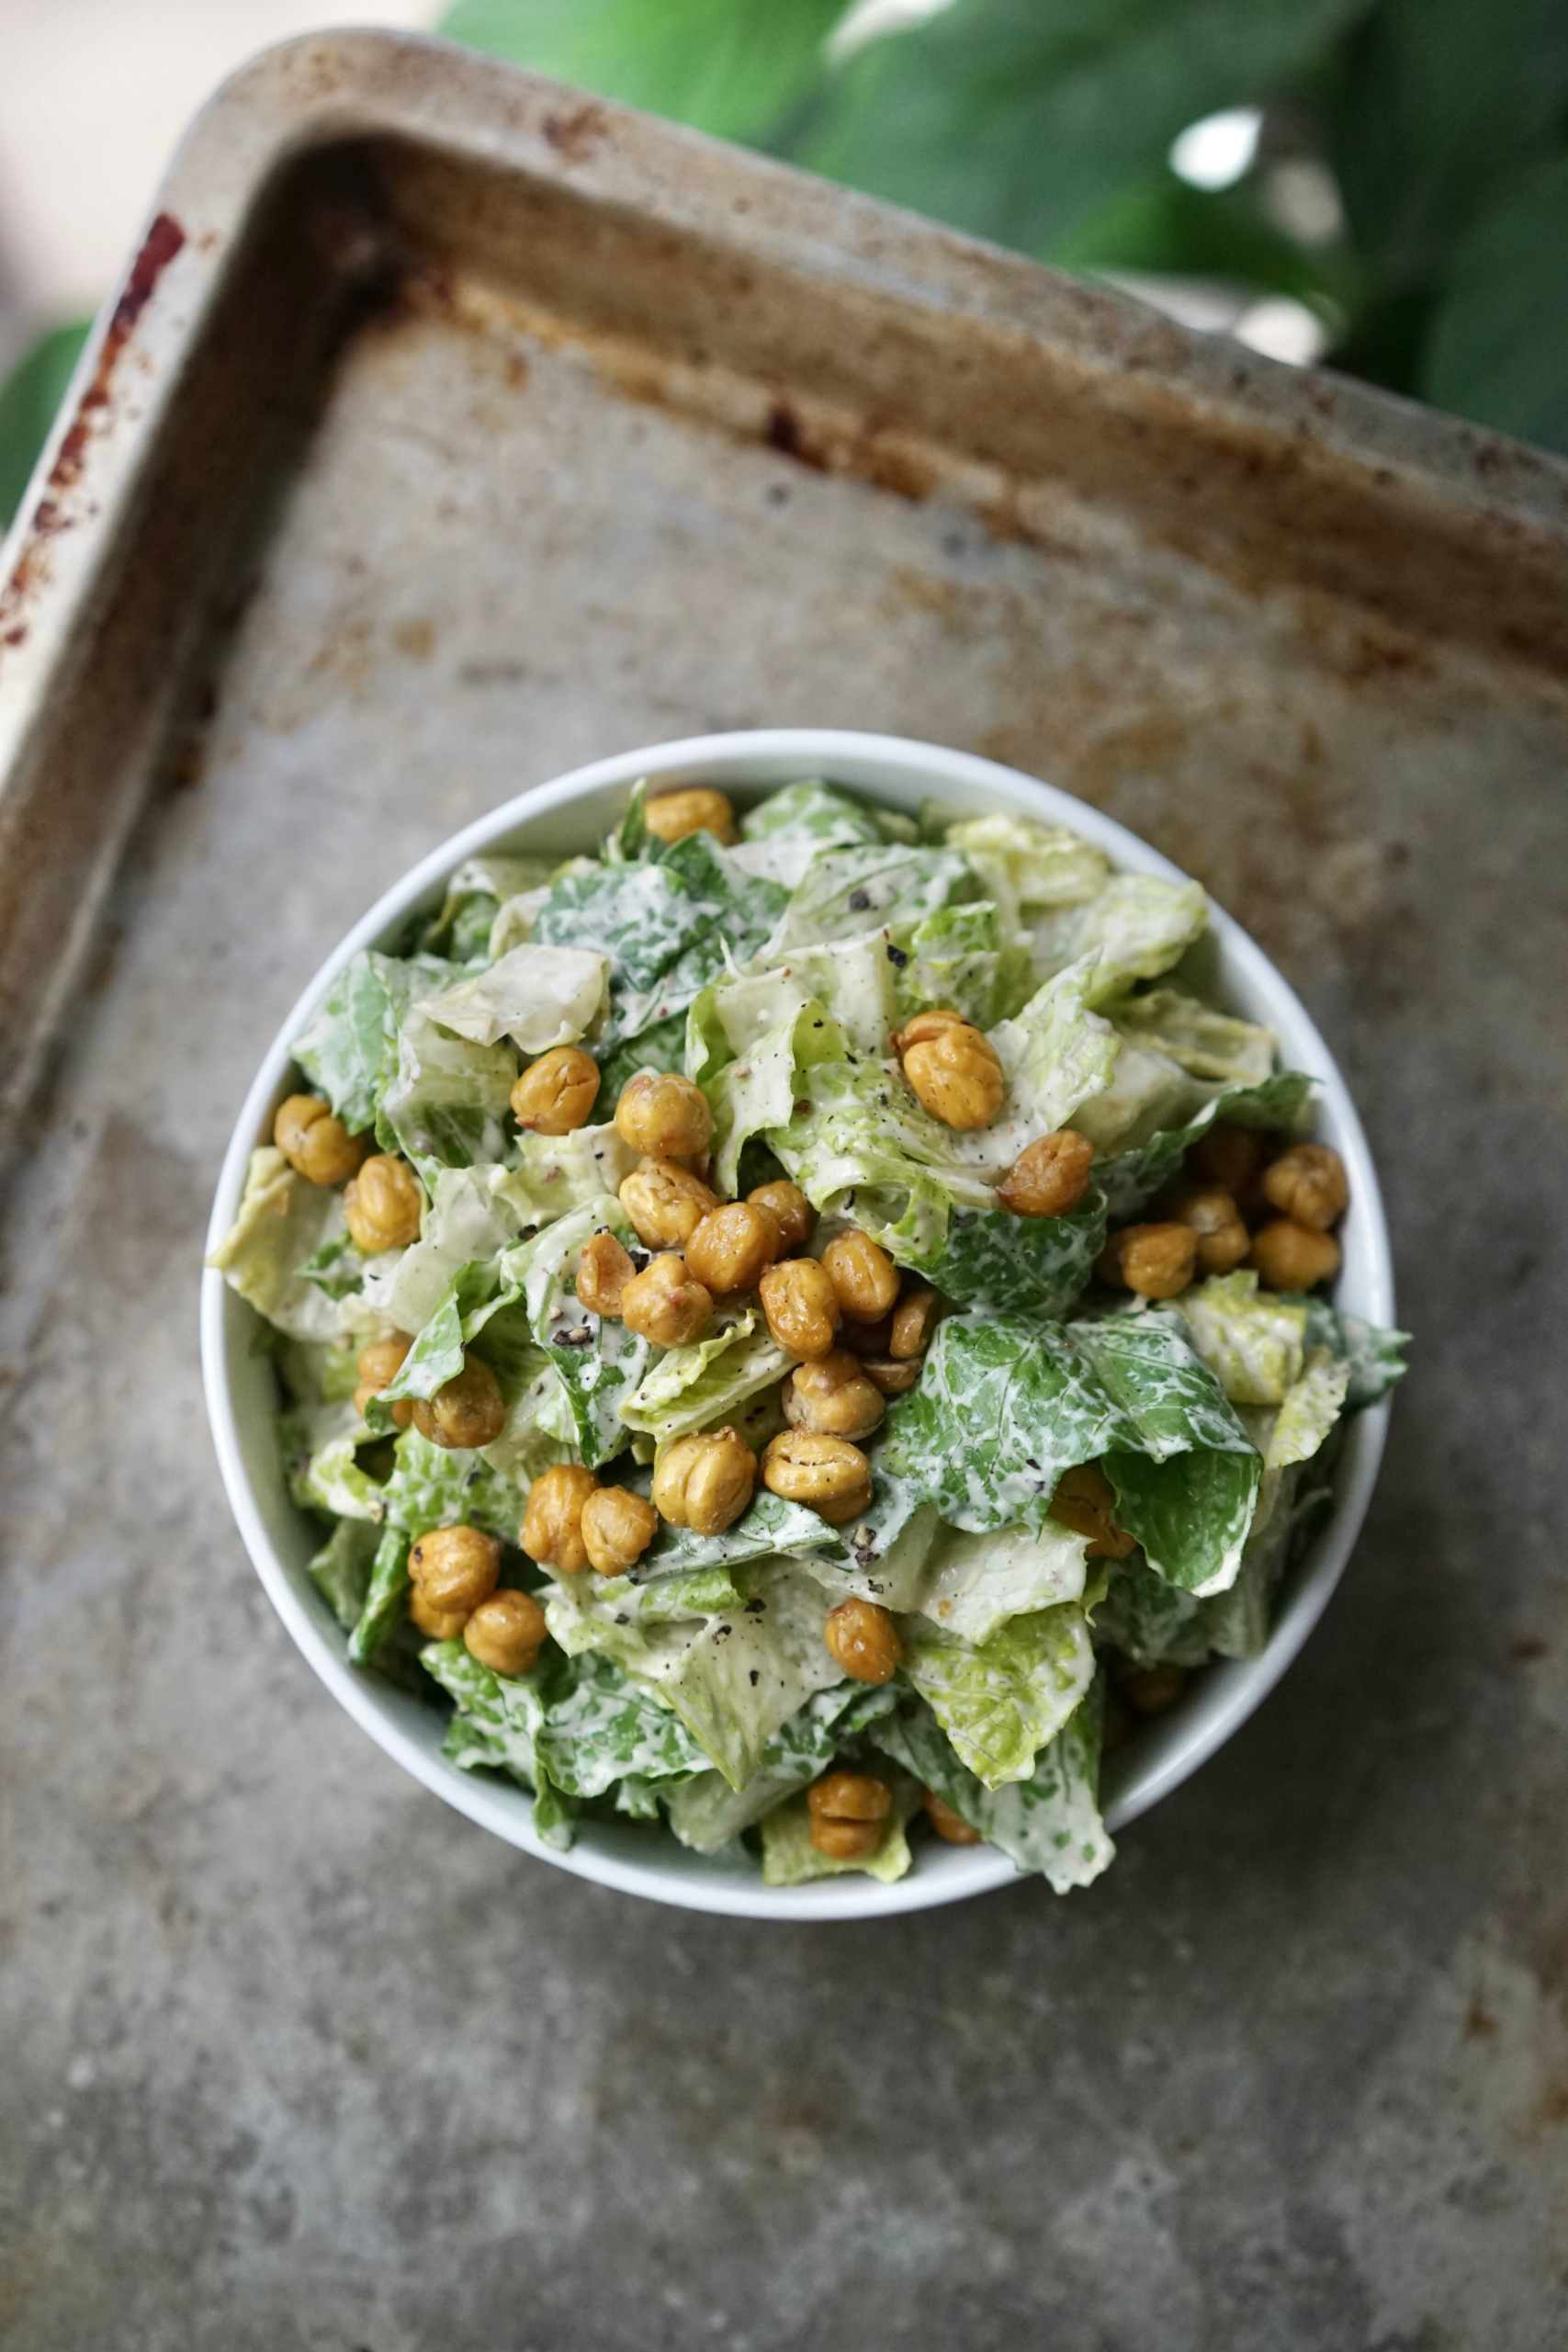 Spiced Vegan Tahini Caesar Salad with Crispy Chickpea Croutons | Living Healthy in Seattle